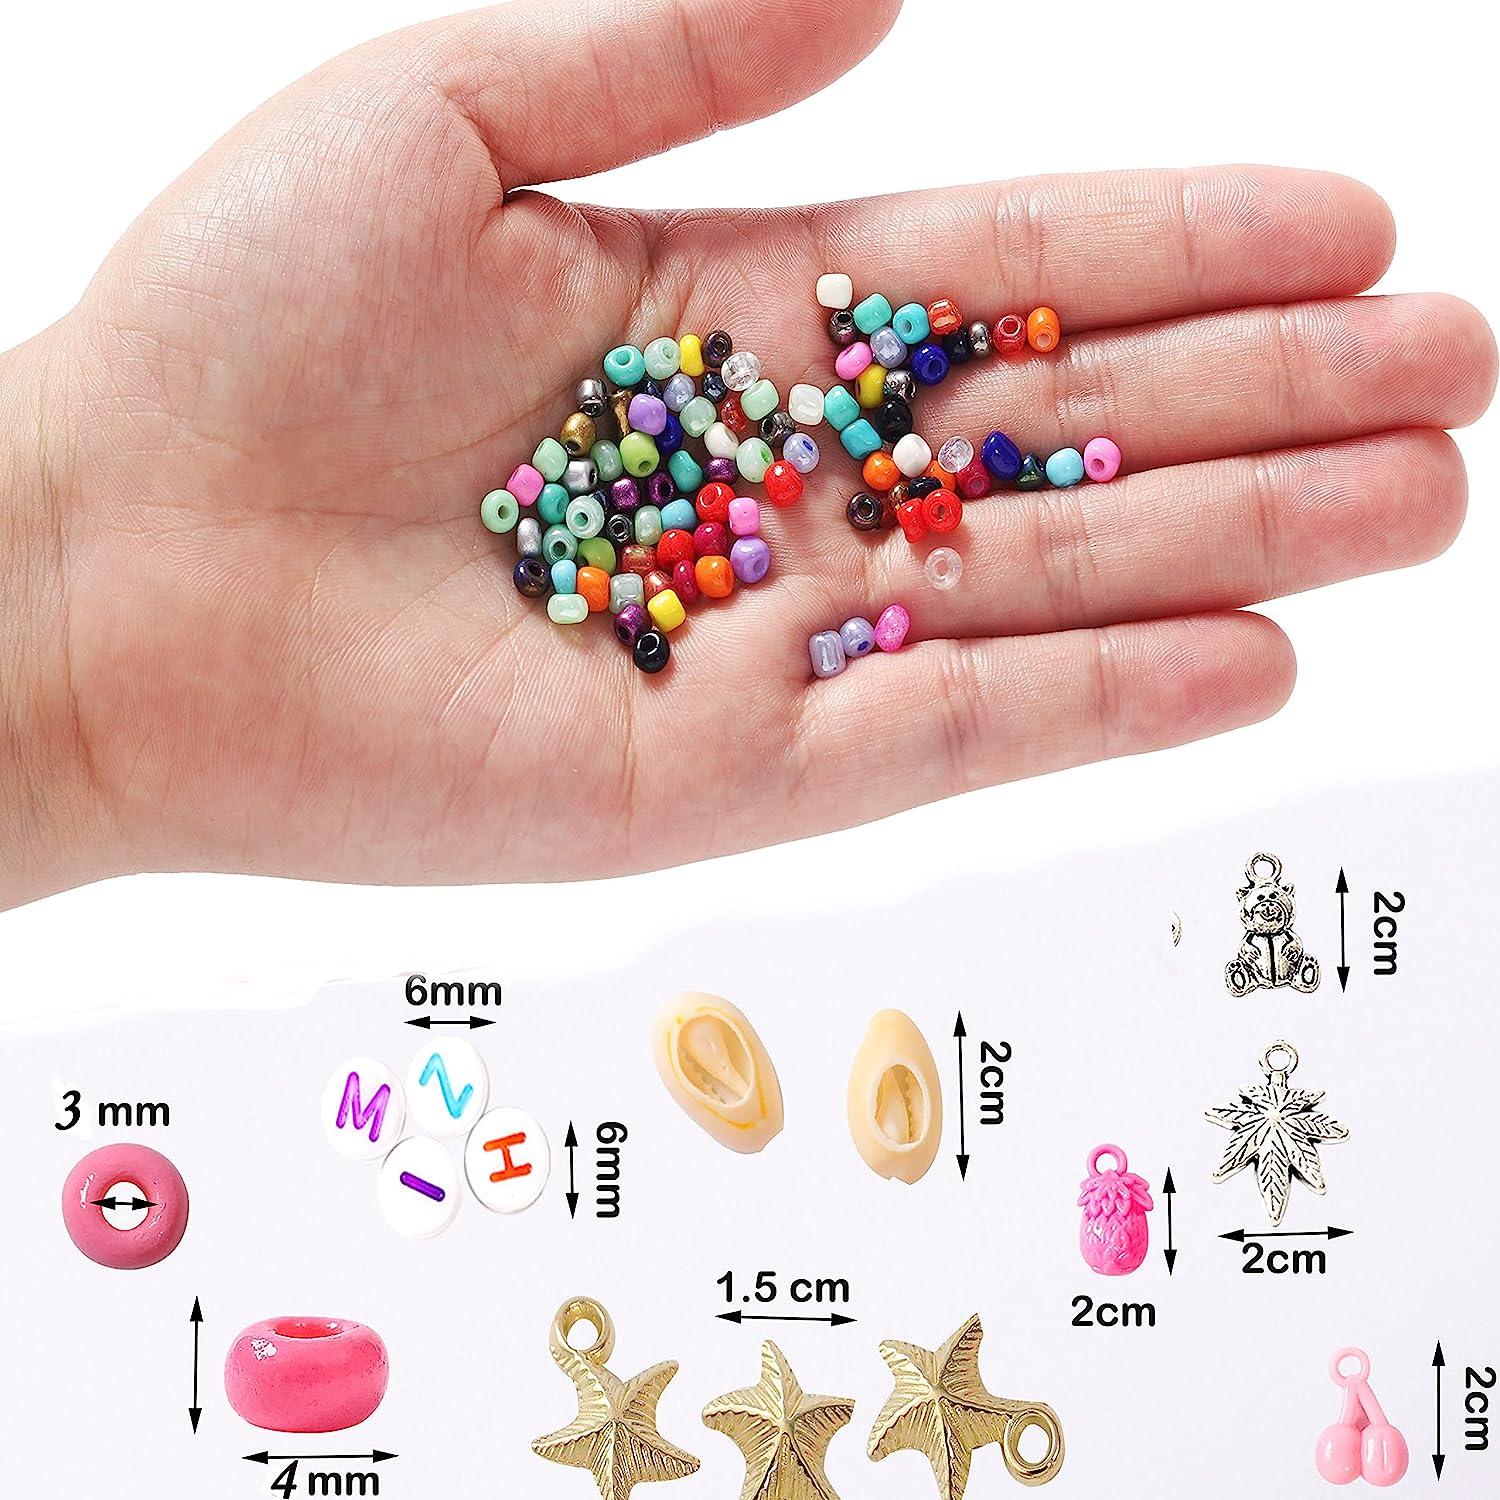 YITOHOP 8800+pcs 4mm 12/0 48 Colors Glass Seed Beads Charms